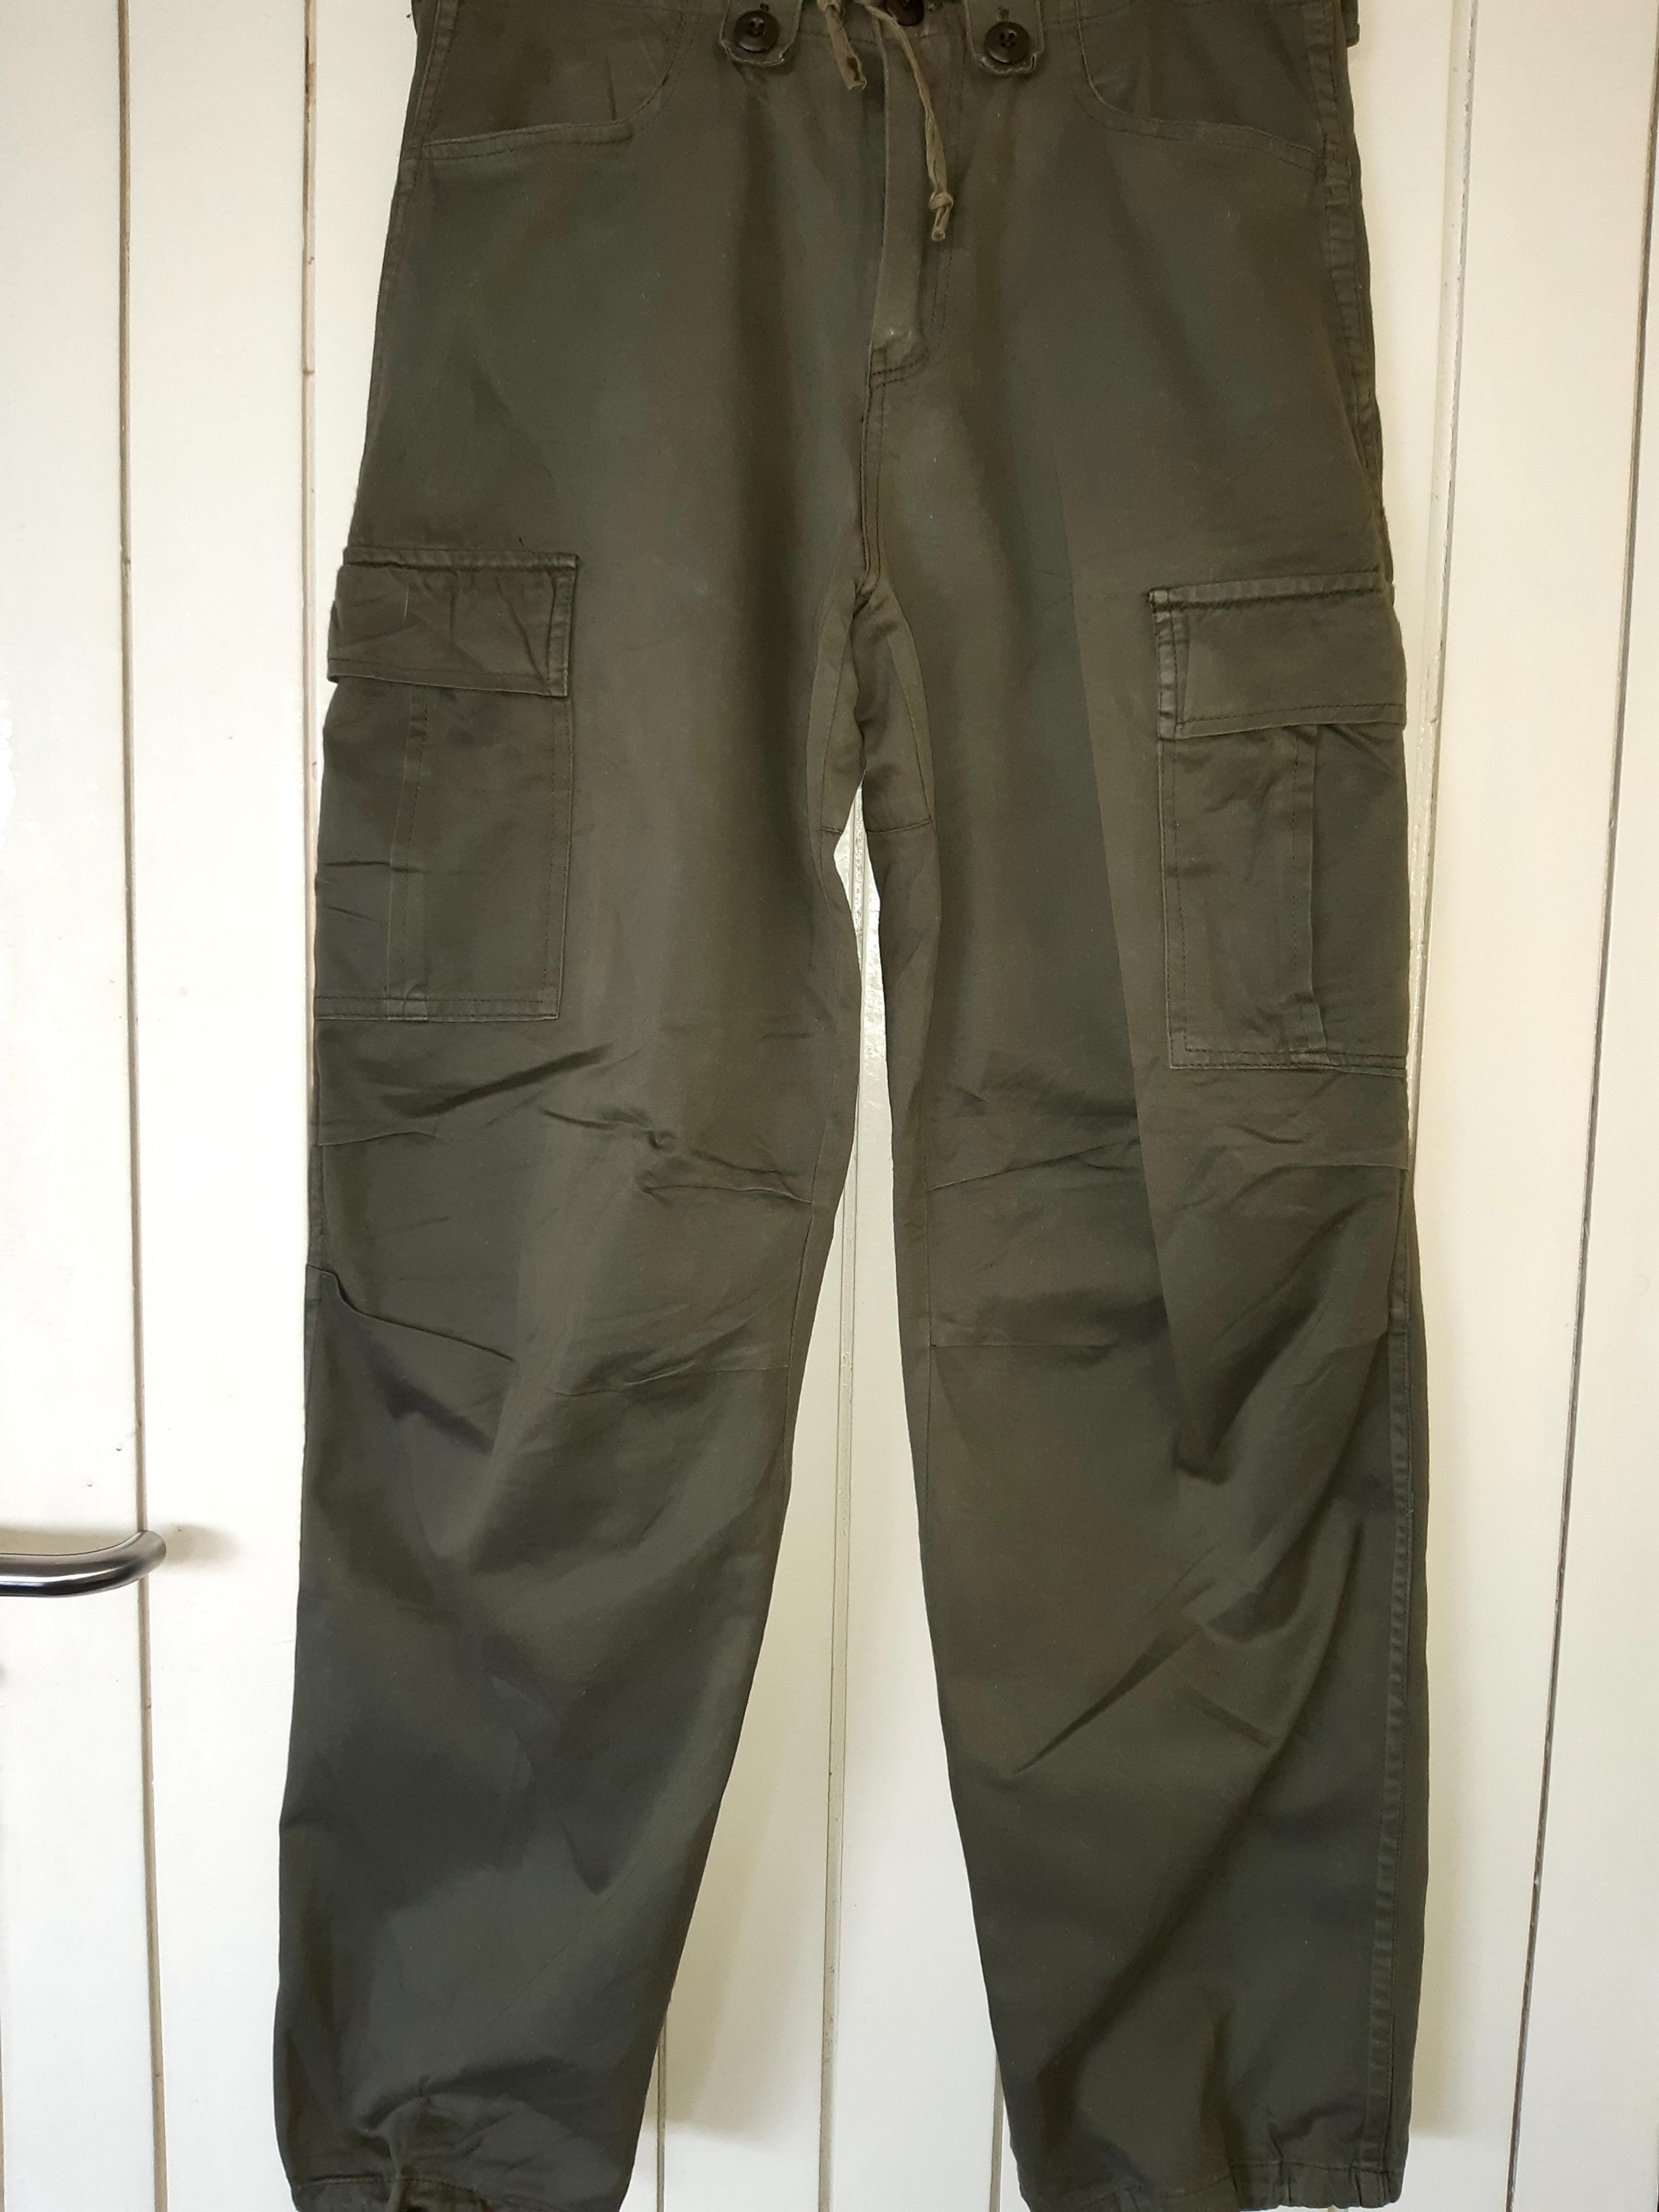 mens cargo pants with drawstring bottoms